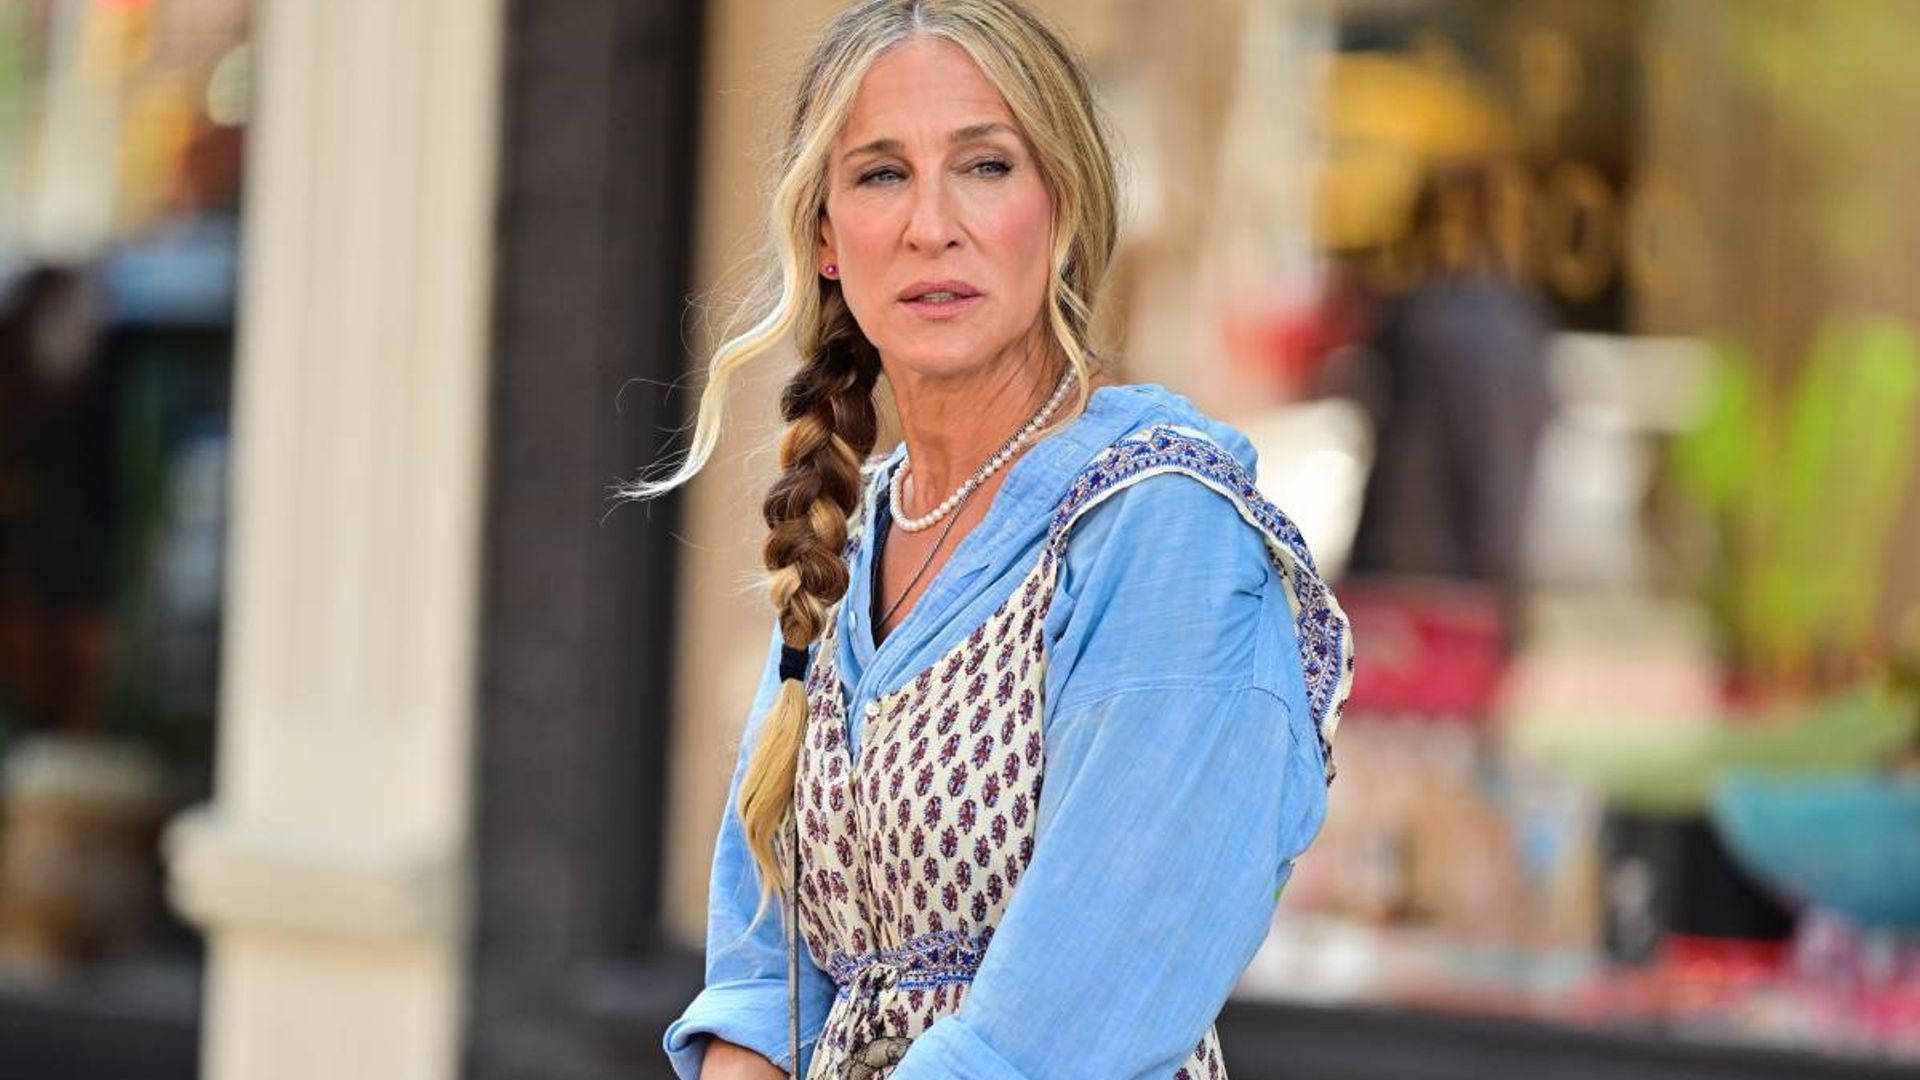 Sarah Jessica Parker’s stunning lace-up mules on SATC reboot have everyone talking - and we want them asap